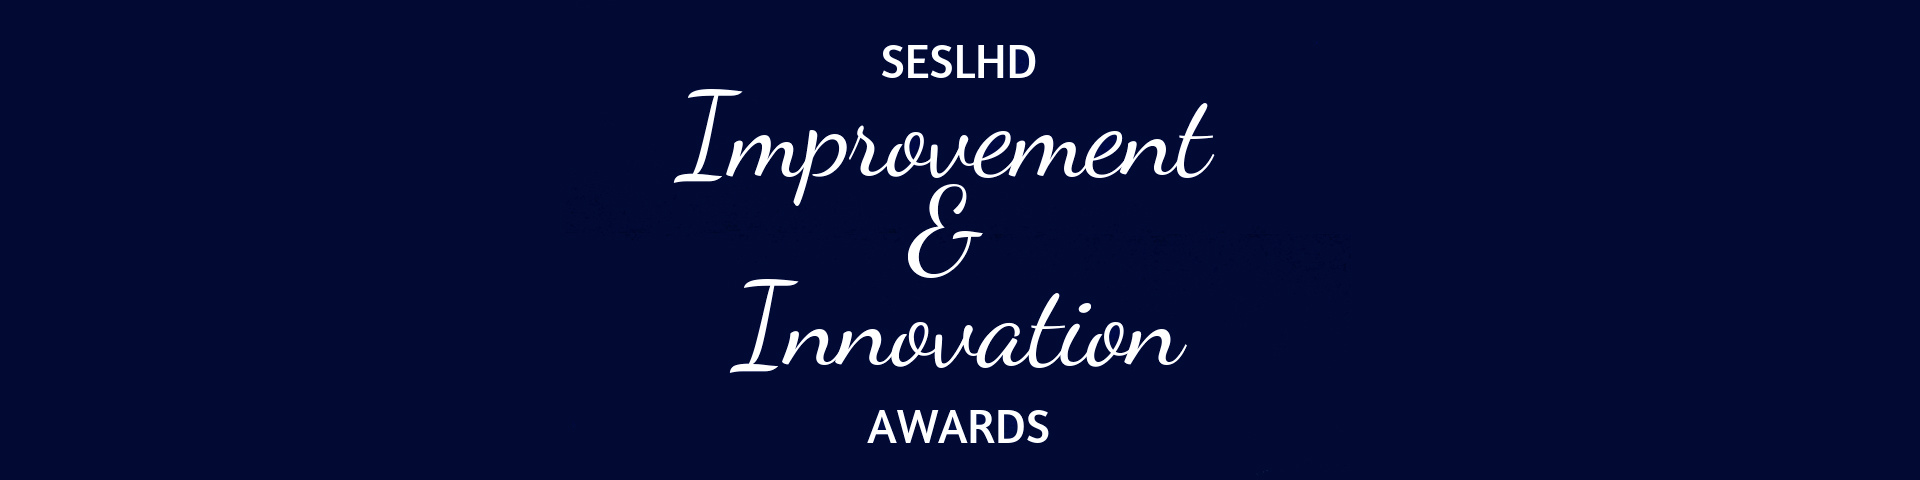 2019 Improvement and Innovation Awards wording on blue background